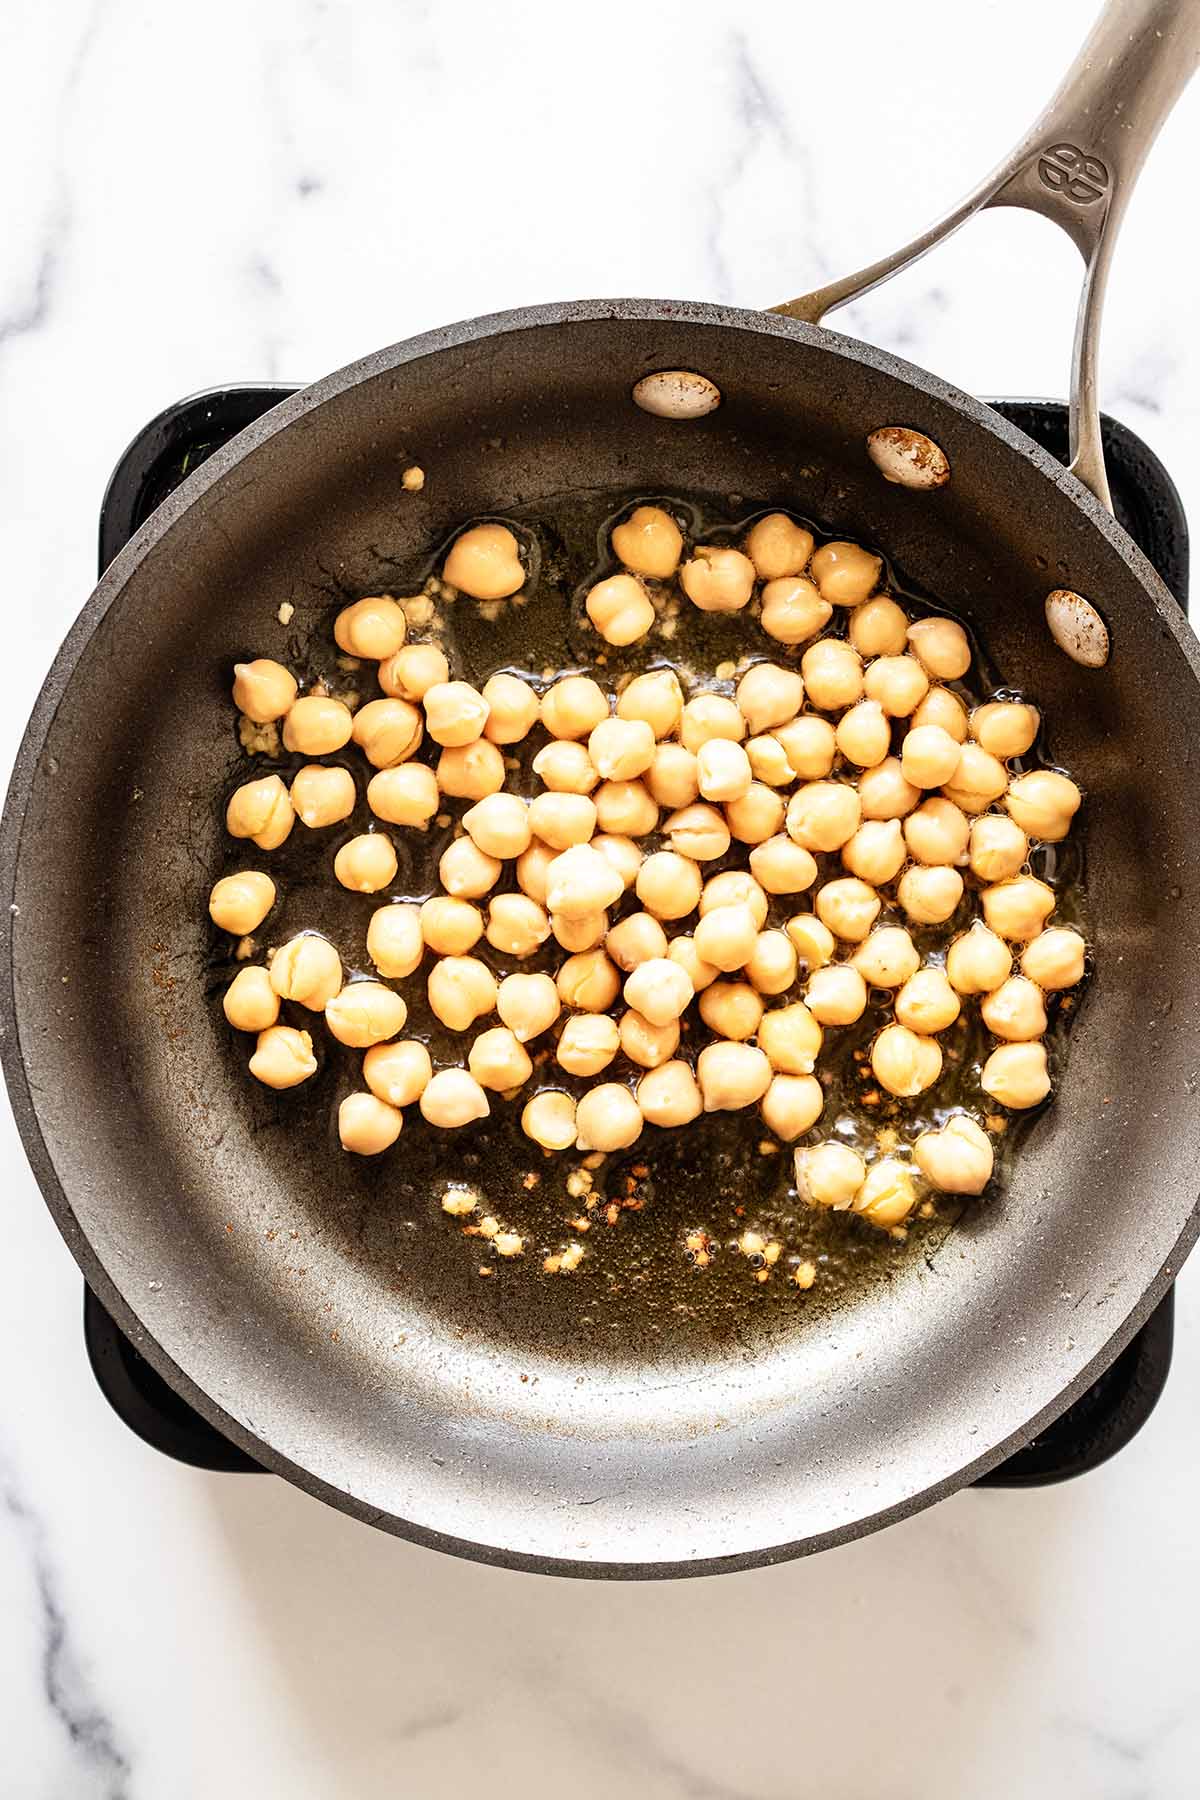 Overhead view of chickpeas and garlic cooking in a skillet